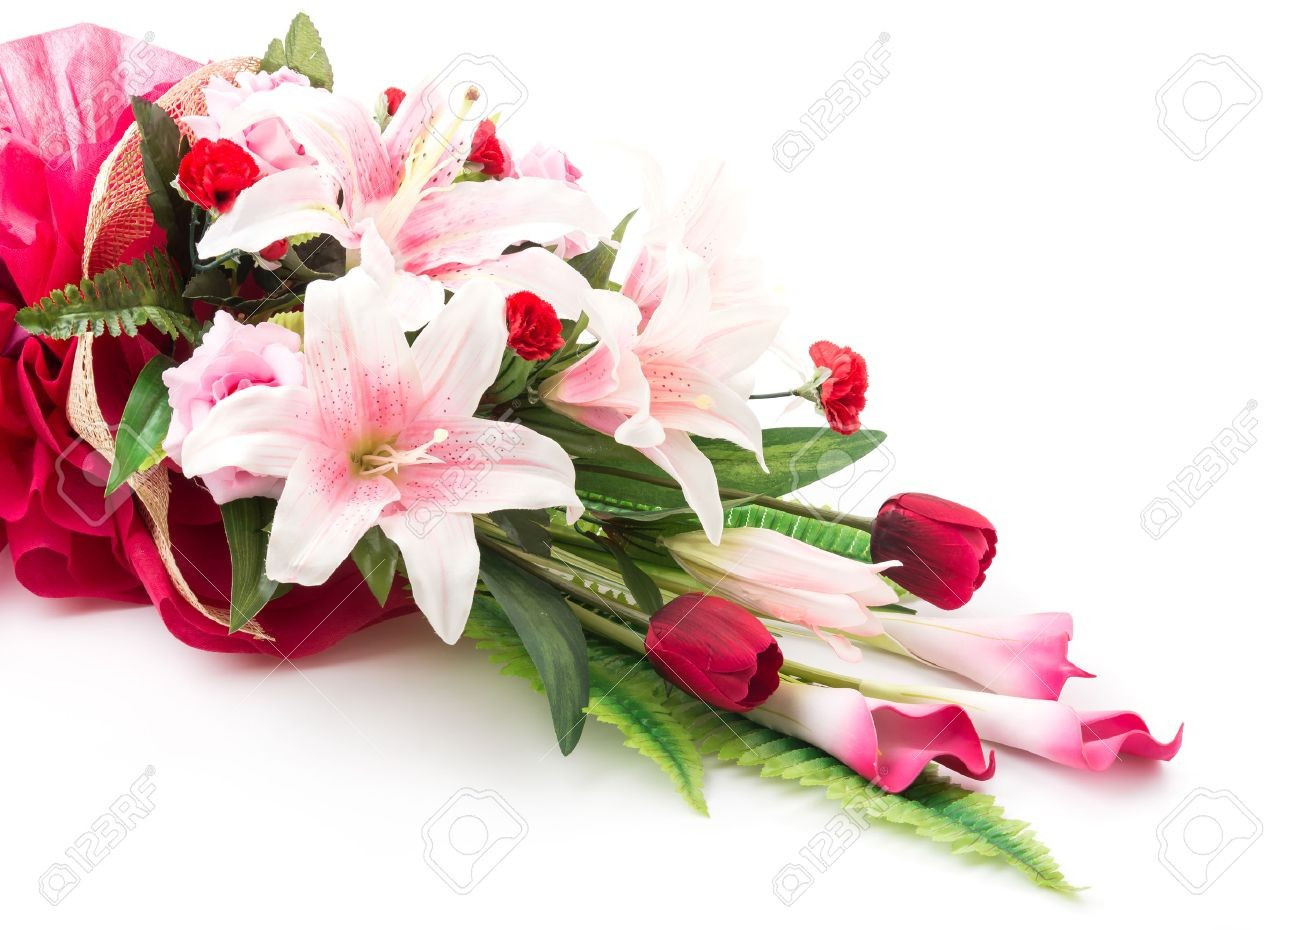 11 Wonderful Bouquet Of Flowers In Vase 2024 free download bouquet of flowers in vase of flower pink beautiful white image gallery beautiful h vases vase throughout flower pink beautiful white image gallery unique flowers bouquet stock s royalty fre